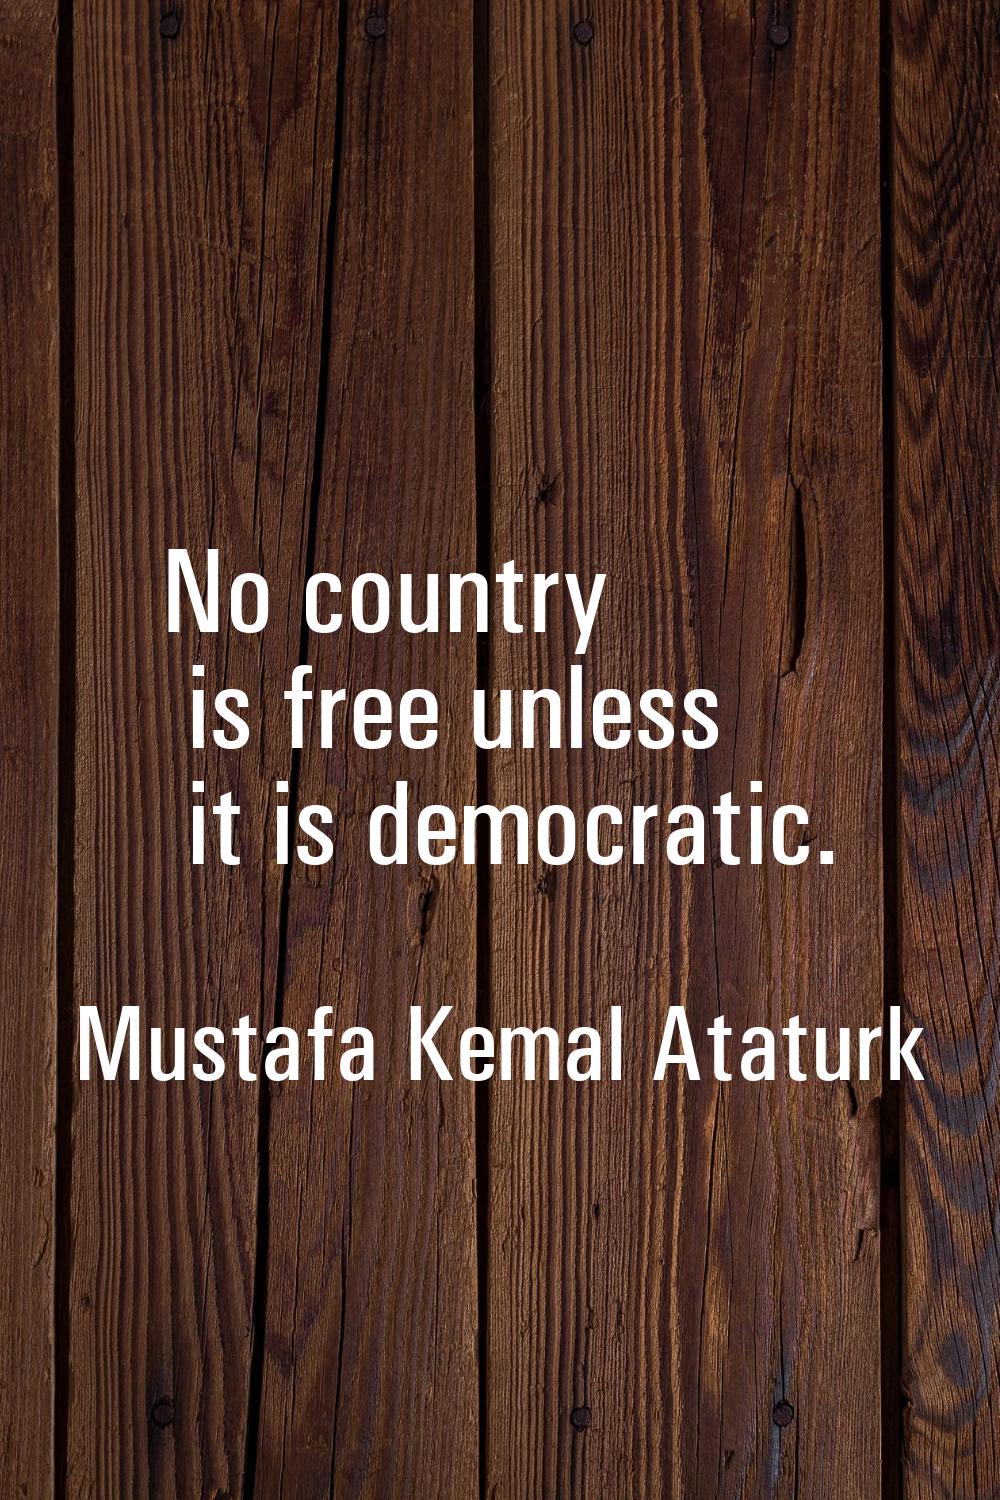 No country is free unless it is democratic.